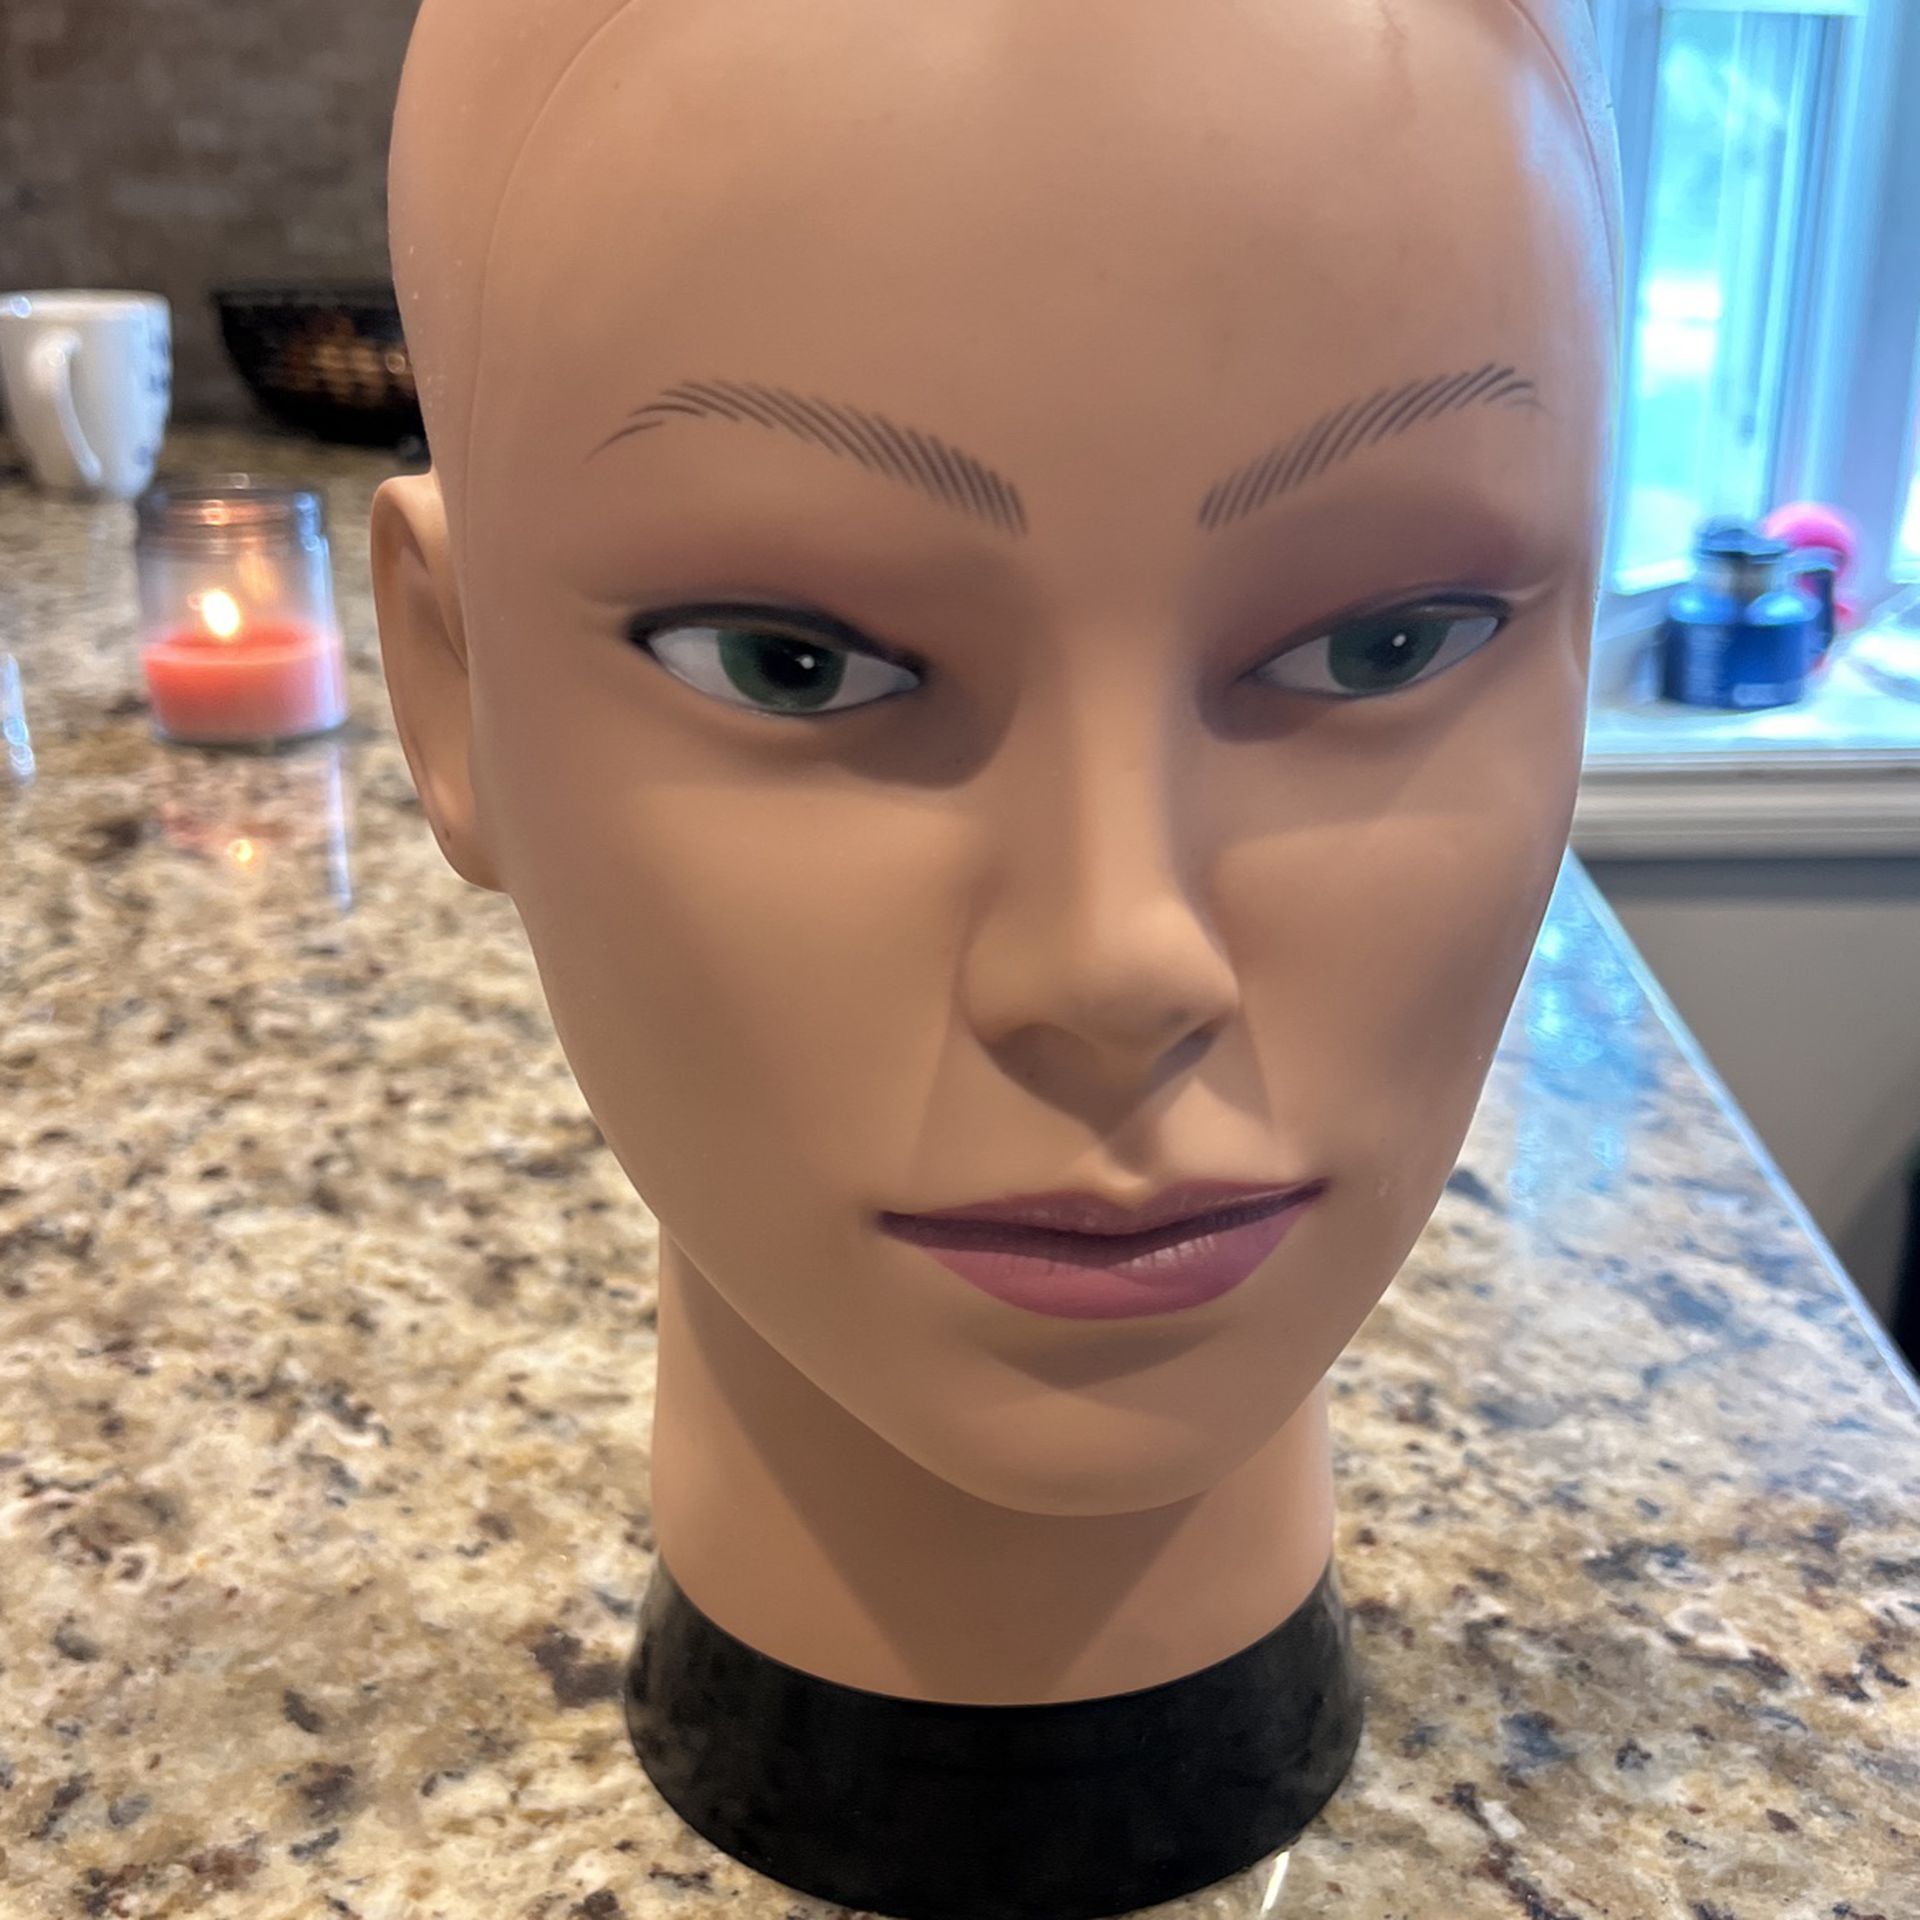 MIAOMANZI Bald Female Training Head Cosmetology Mannequin Head for Wigs  Making and Display with Free clamp